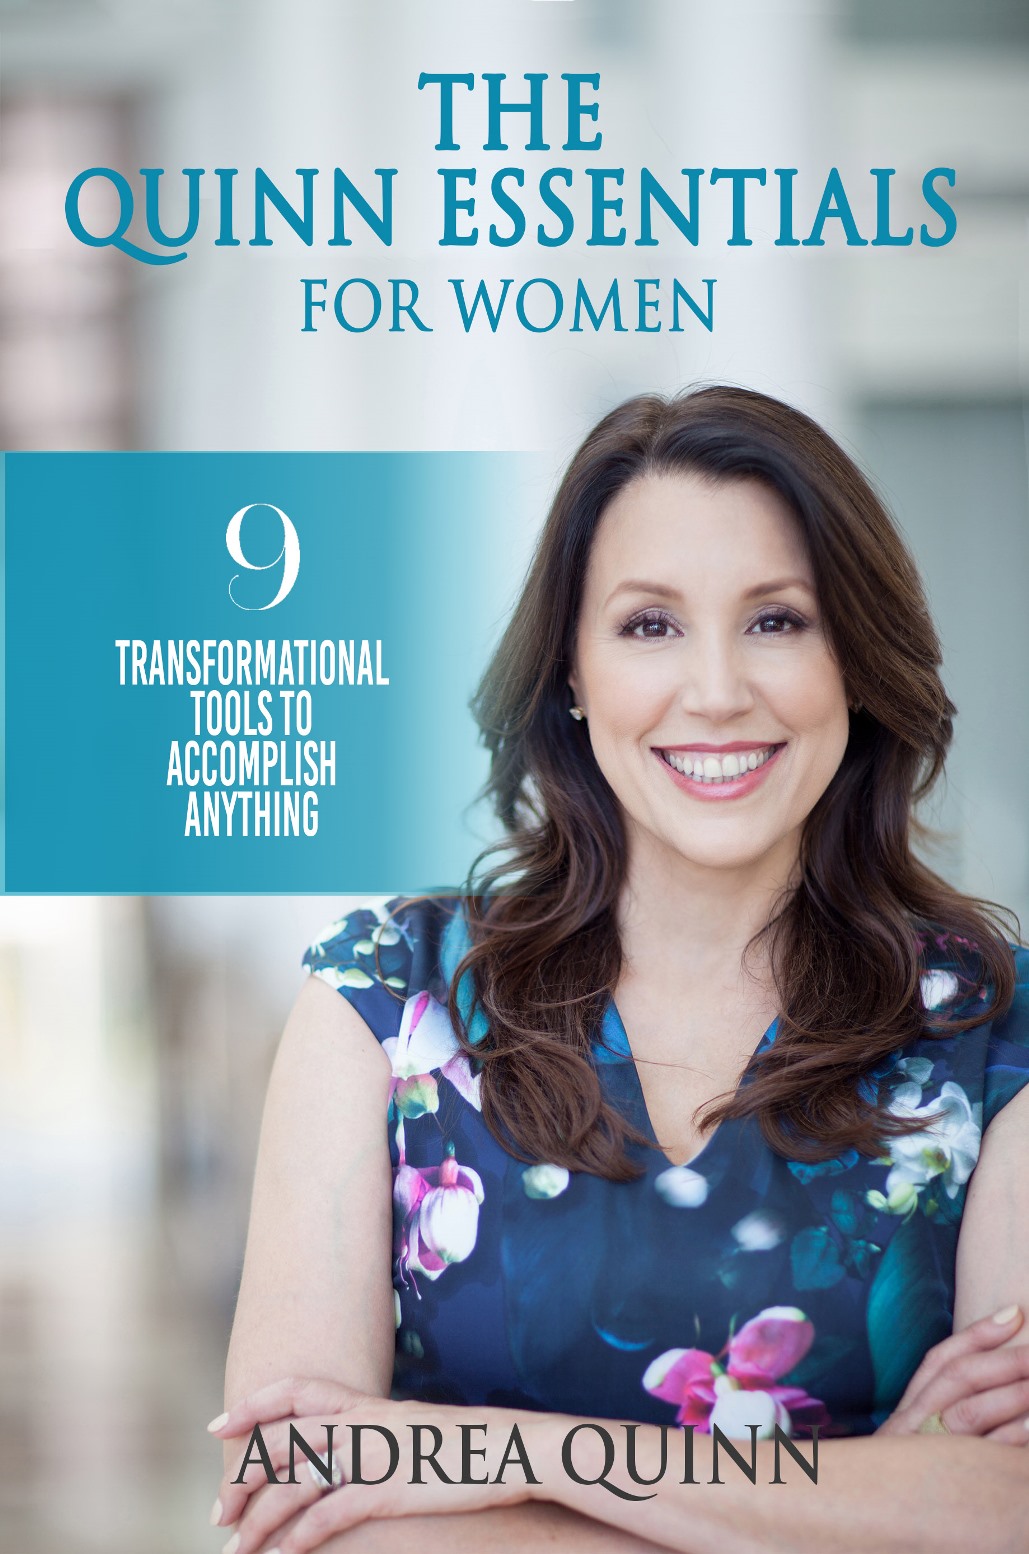 The Quinn Essentials For Women - 9 Transformational Tools to Accomplish Anything by Andrea Quinn